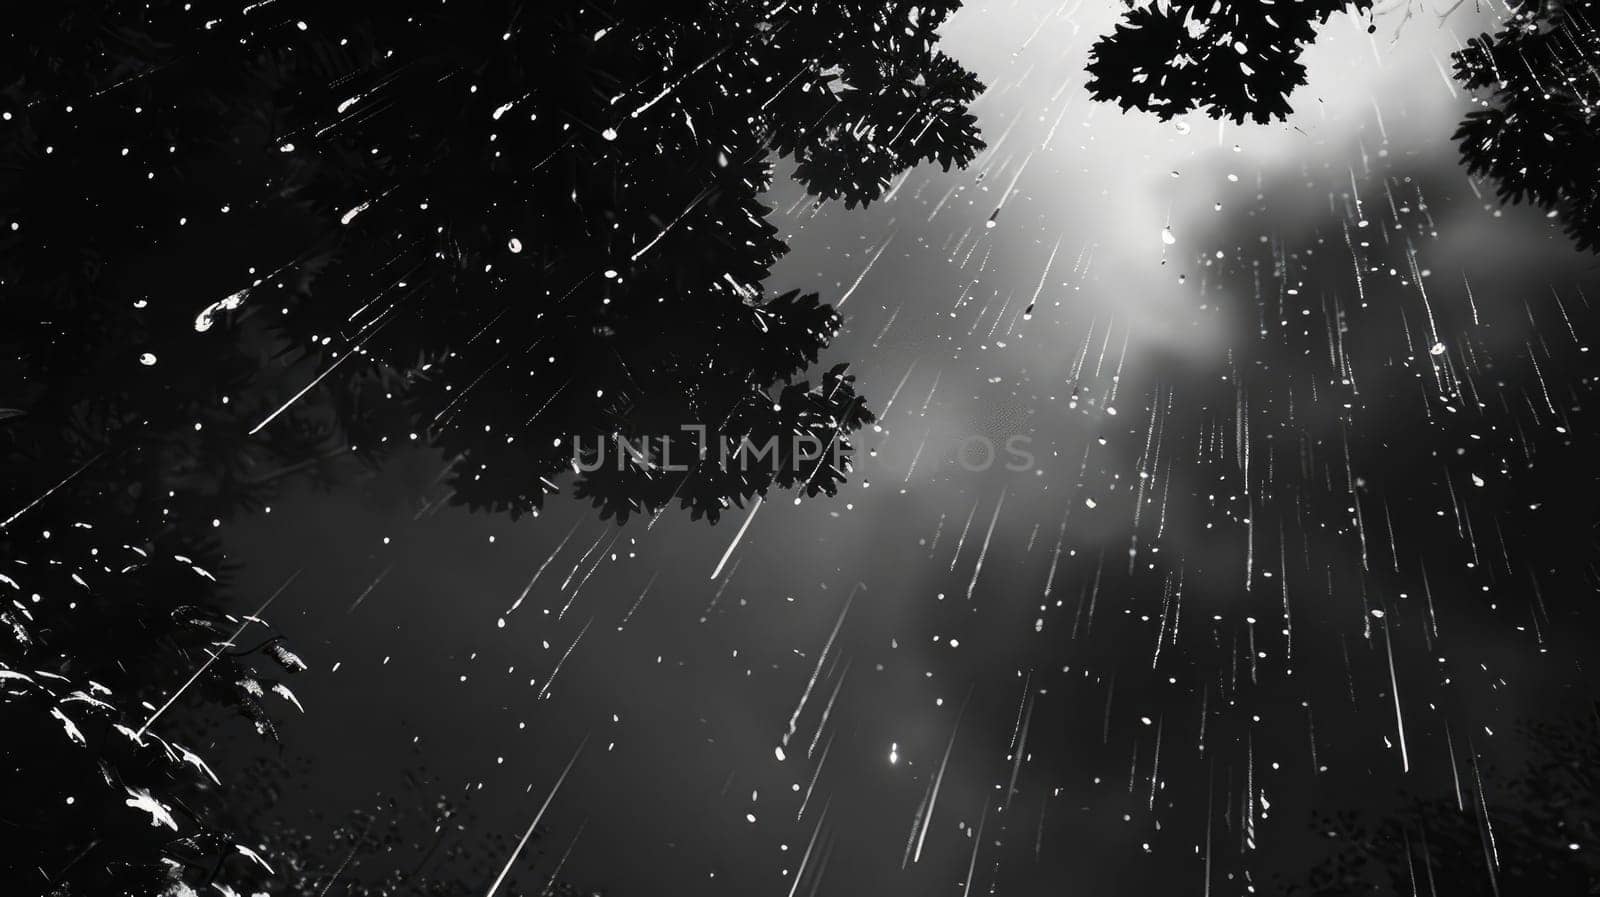 A black and white photo of a rainy night with a tree in the foreground. The sky is dark and cloudy, and the rain is falling in a steady stream. Scene is somber and melancholic